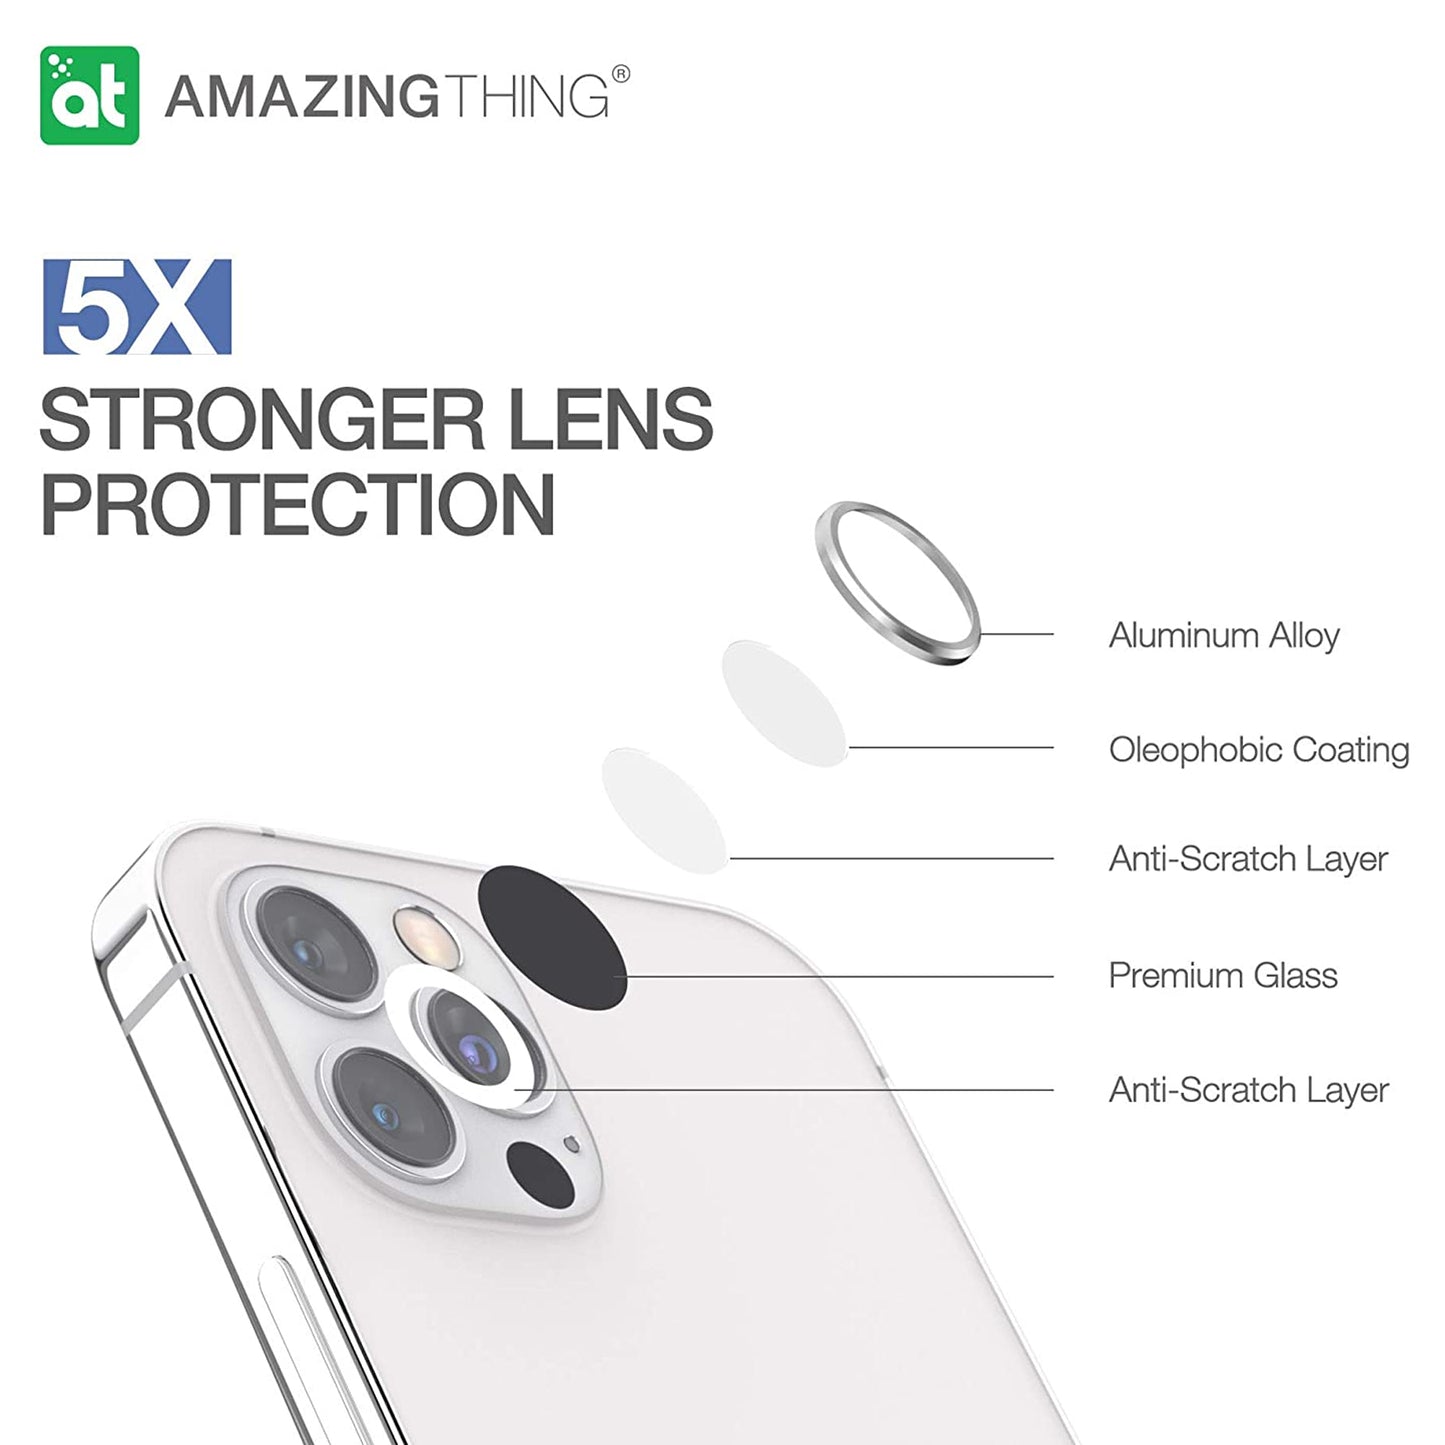 AMAZINGthing SUPREME AR 3D LensGlass Protector for iPhone 13 Pro Max 6.7" 5G ( Three Lens ) - Silver (Barcode: 4892878069564 )